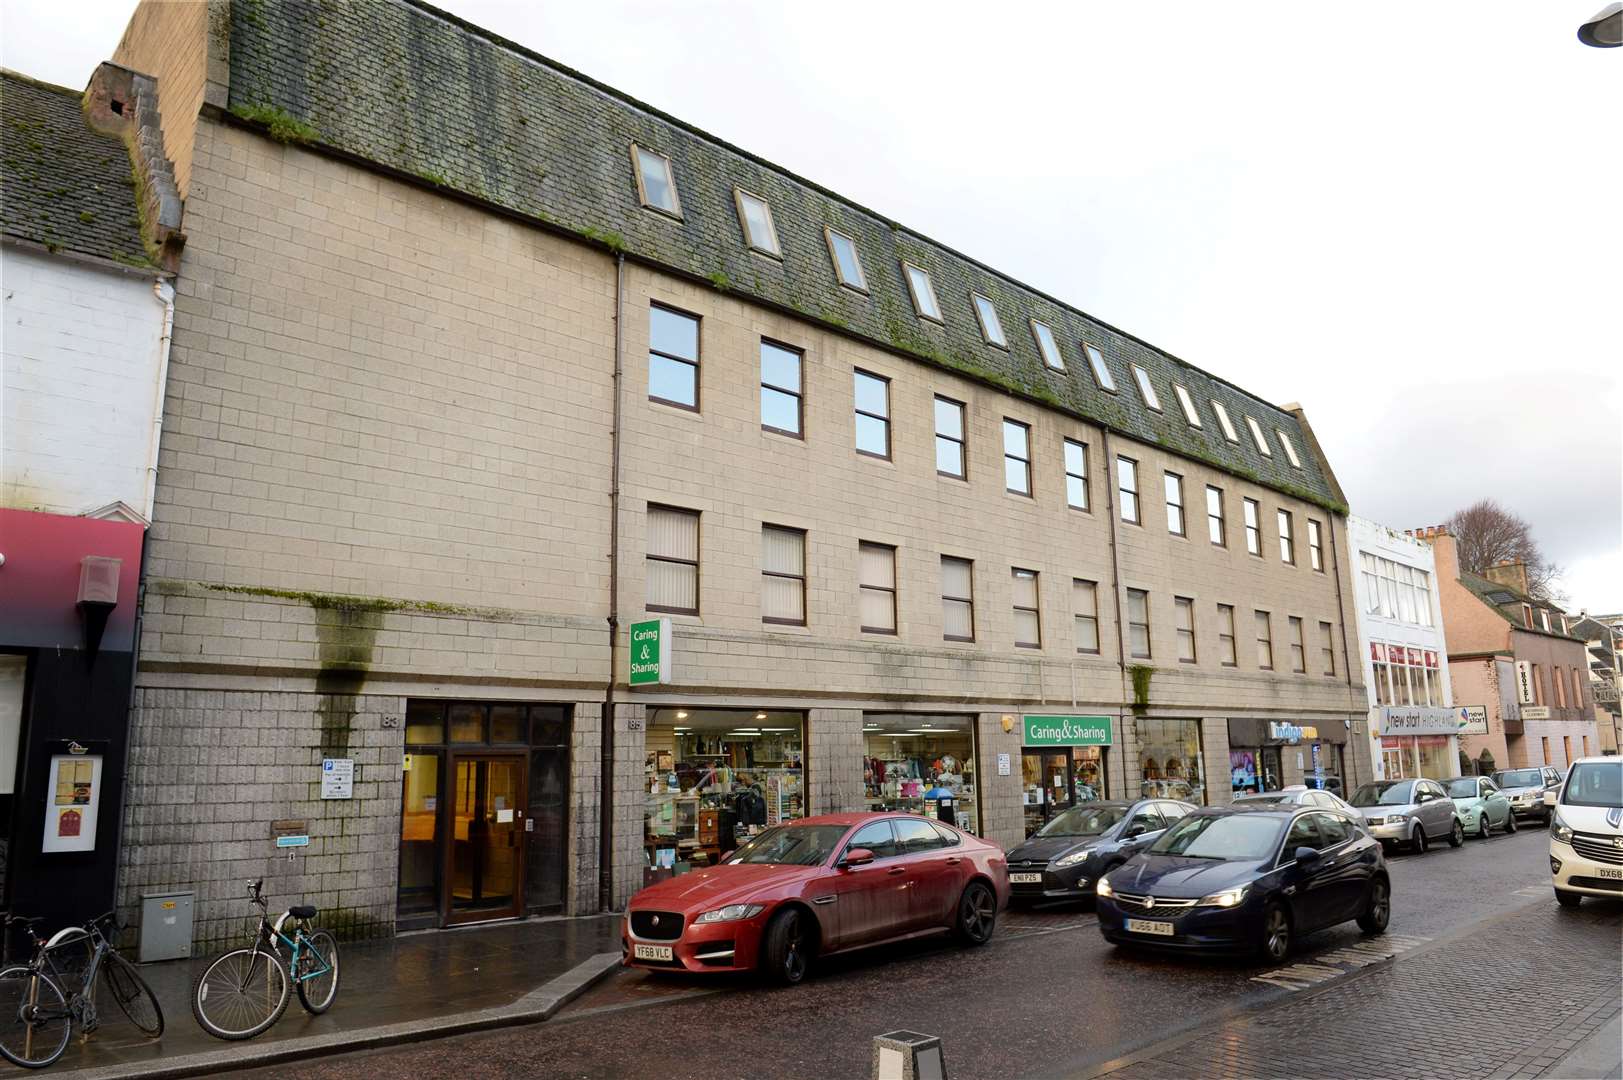 The hotel will replace the former Department of Work and Pensions office in Church Street, Inverness.